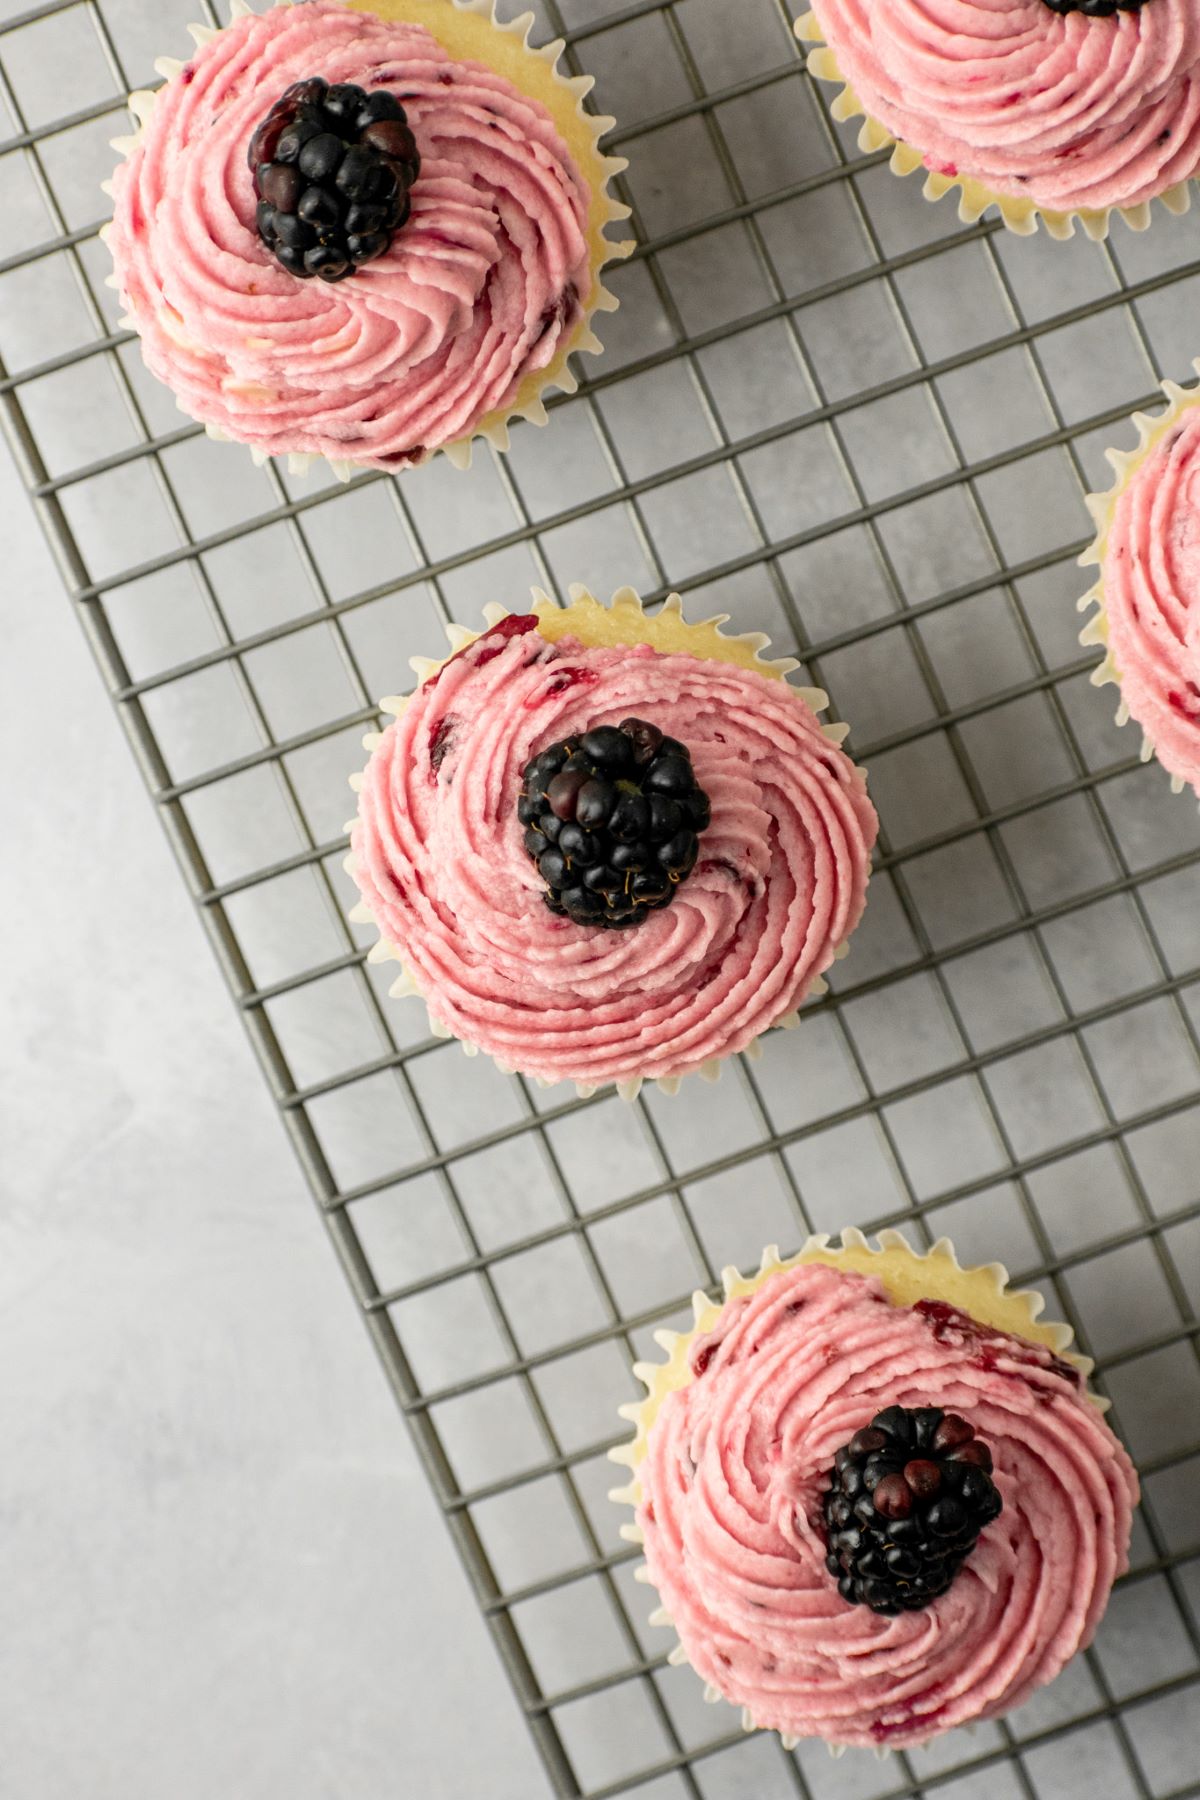 Blackberry frosting with a fresh berry on top of a cupcake.